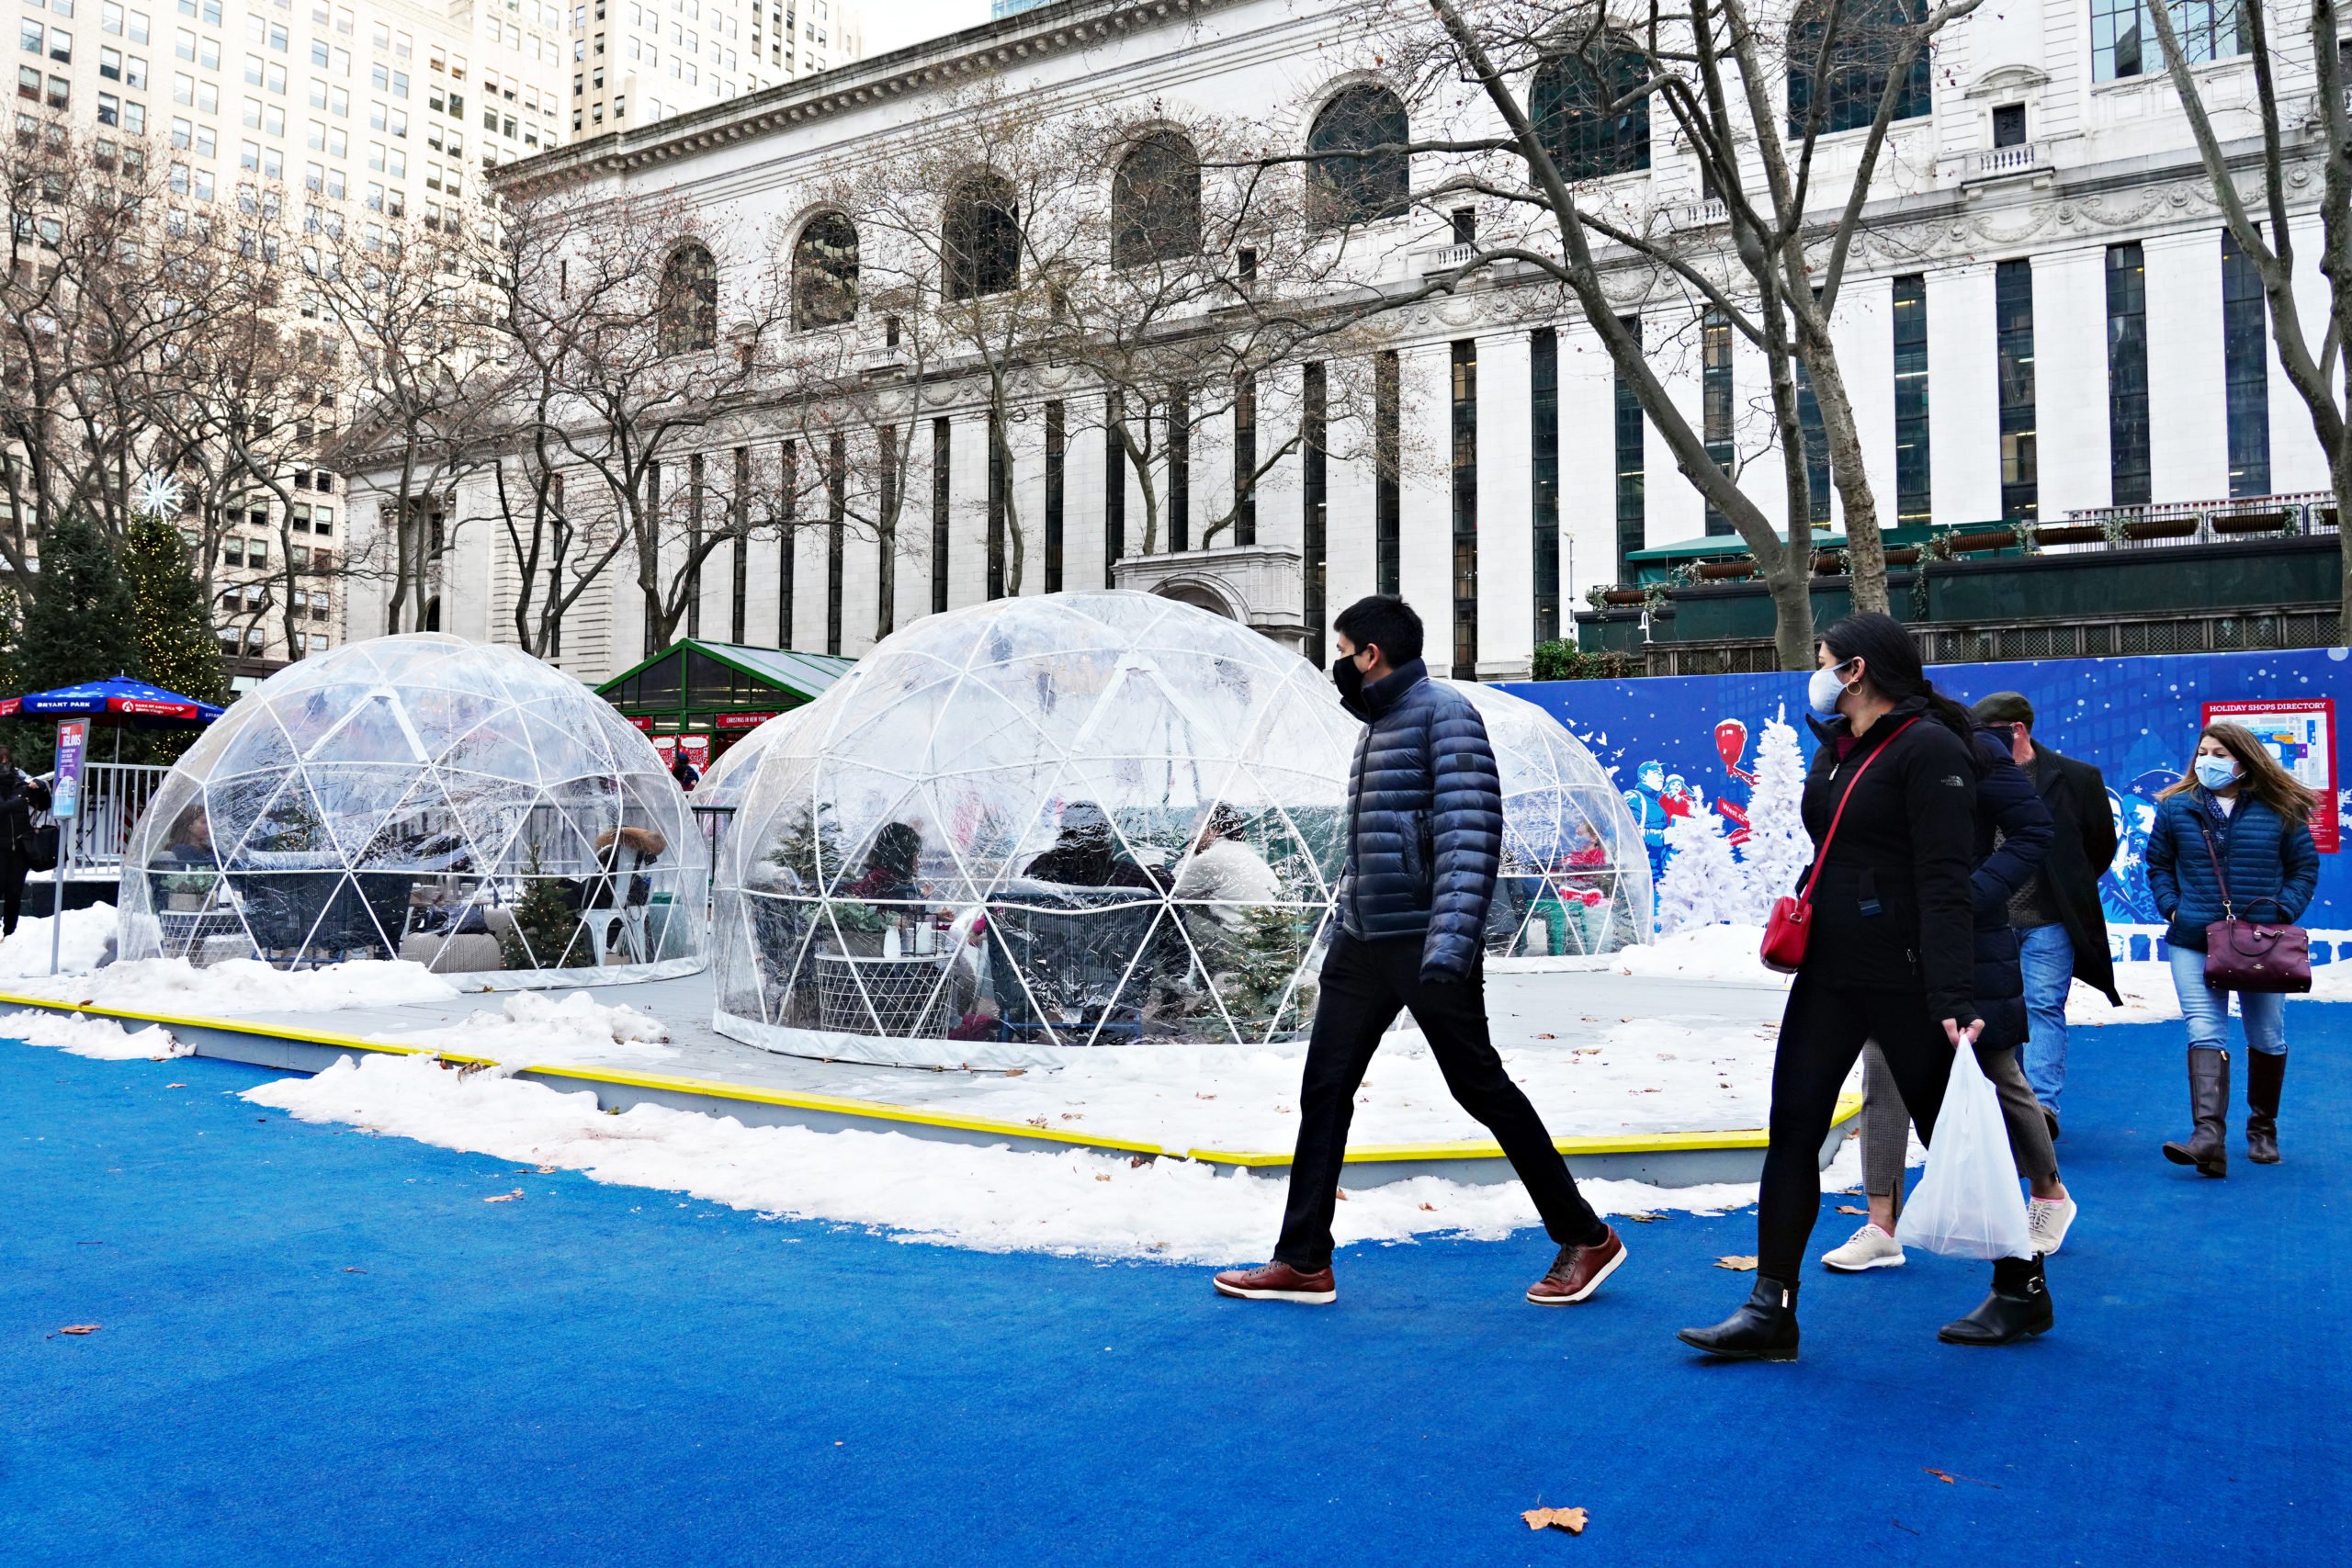 People walk by igloo dining tents at Bank of America Winter Village in Bryant Park on December 23, 2020 in New York City. The pandemic continues to burden restaurants and bars as businesses struggle to thrive with evolving government restrictions and social distancing plans which impact keeping businesses open yet challenge profitability. (Photo by Cindy Ord/Getty Images)